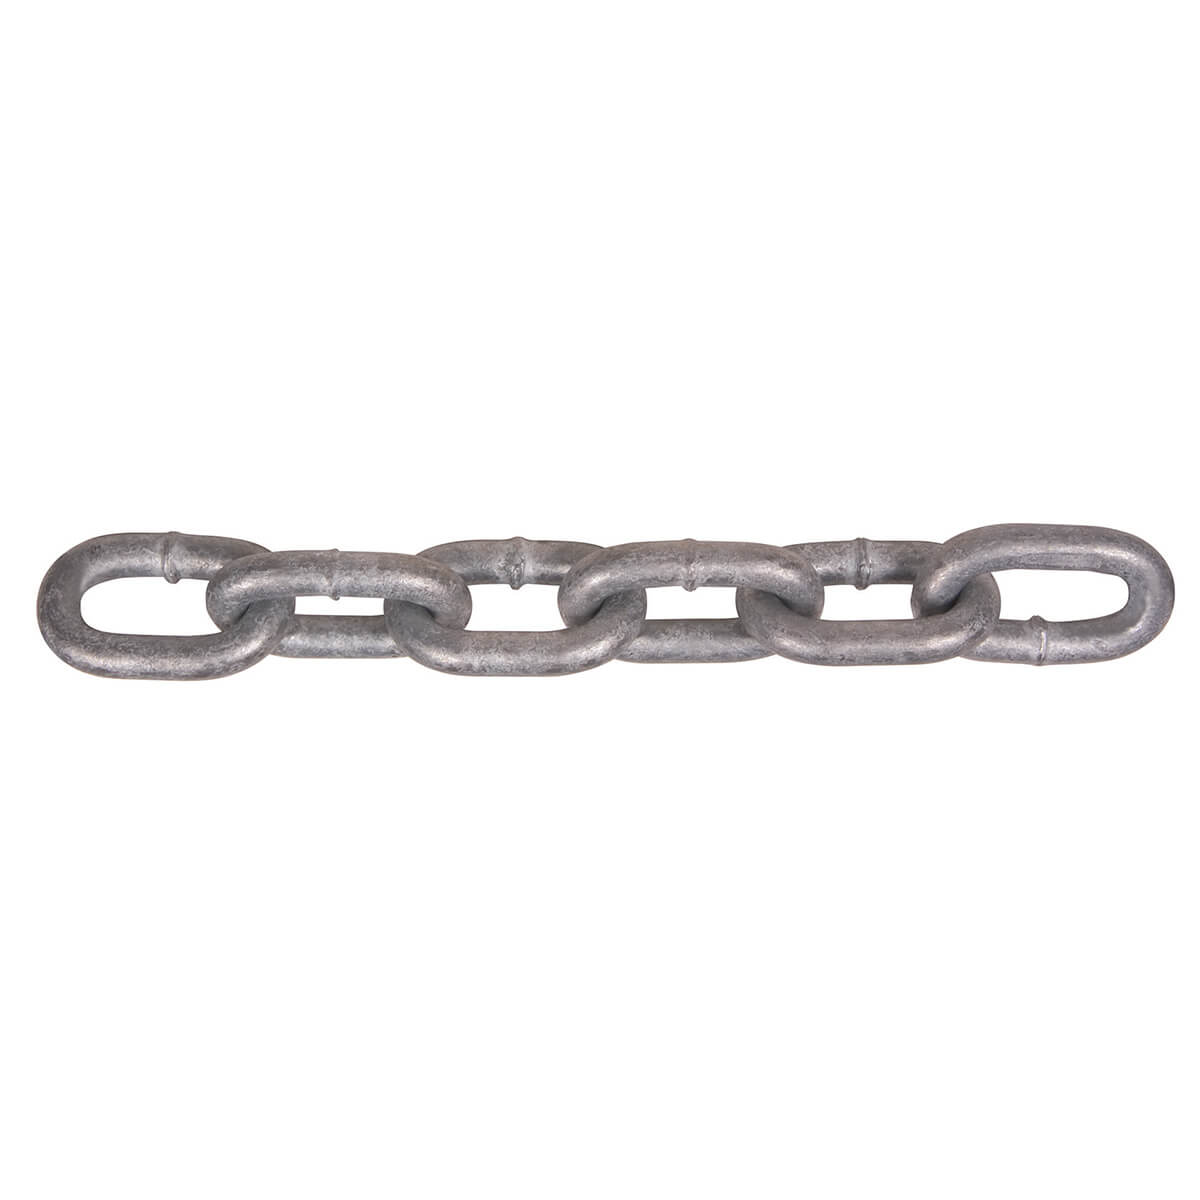 3/16" Utility Chain, Hot Dipped Galvanized